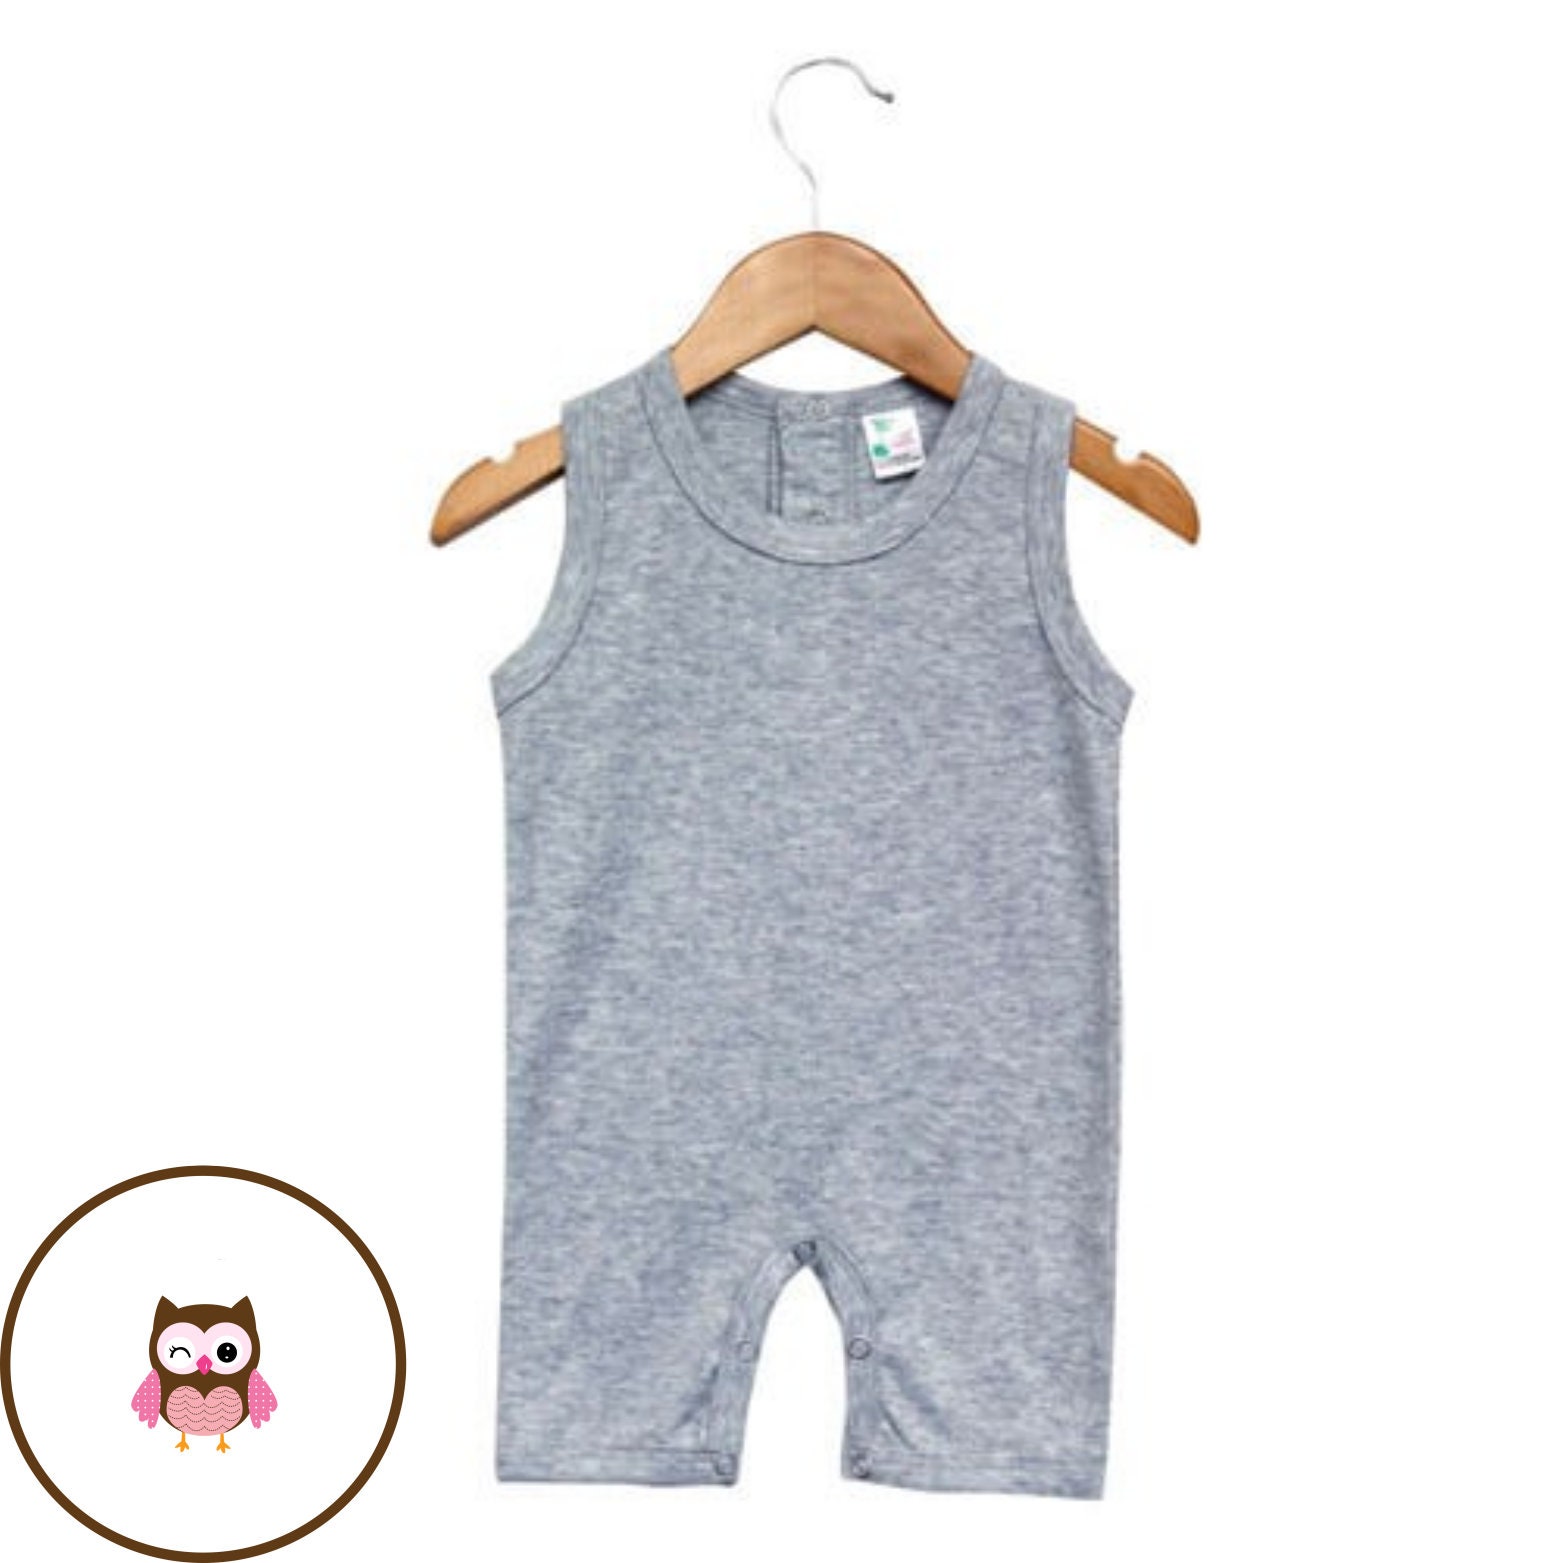 Sublimation Blanks - Poly/Cotton Blend Heather Gray Infant Baby Tank Sleeveless Romper